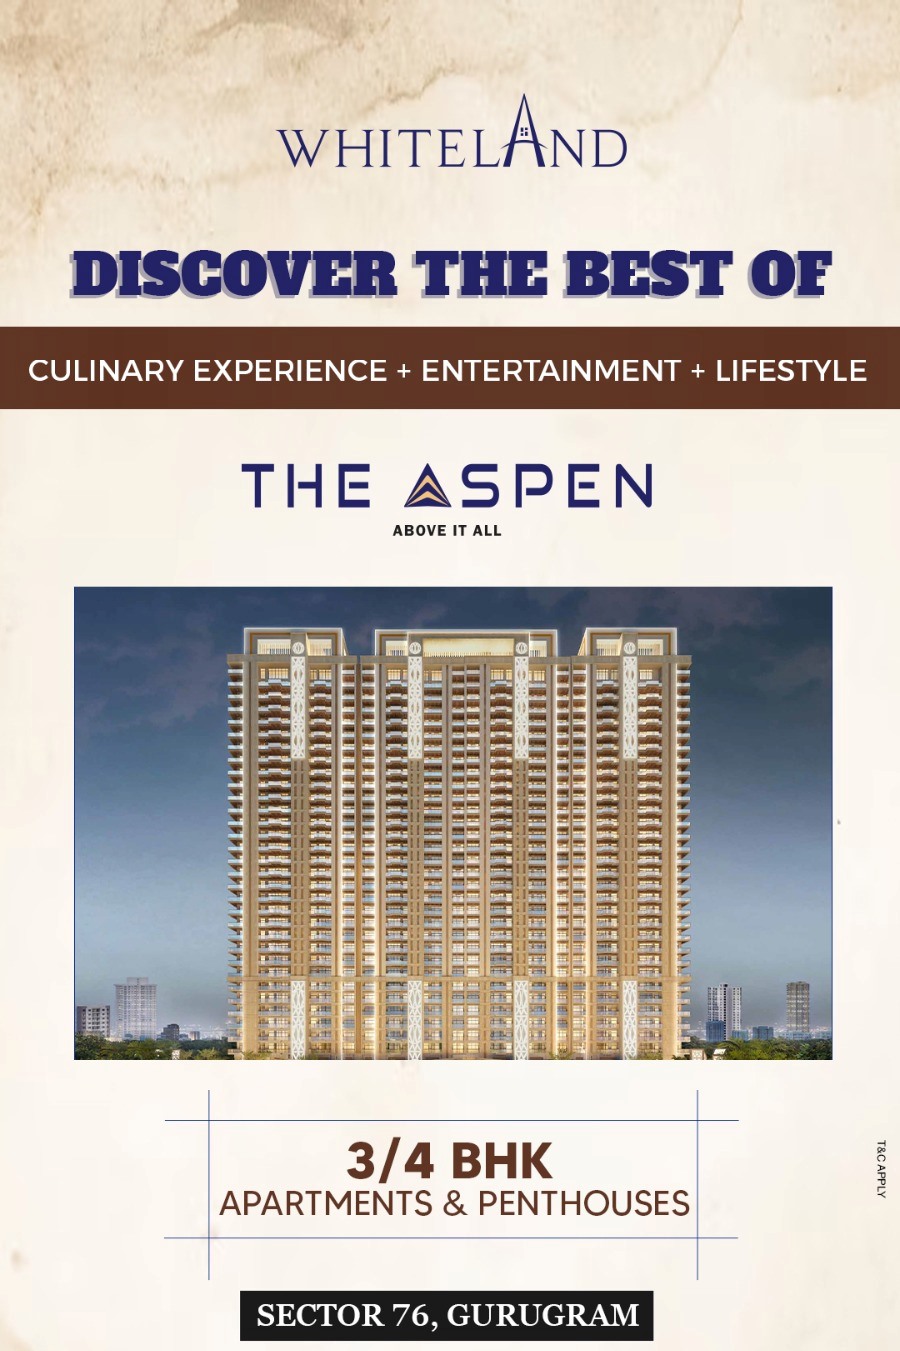 Book 3 & 4 BHK Apartments & Penthouses at Whiteland The Aspen in Sector 76, Gurgaon